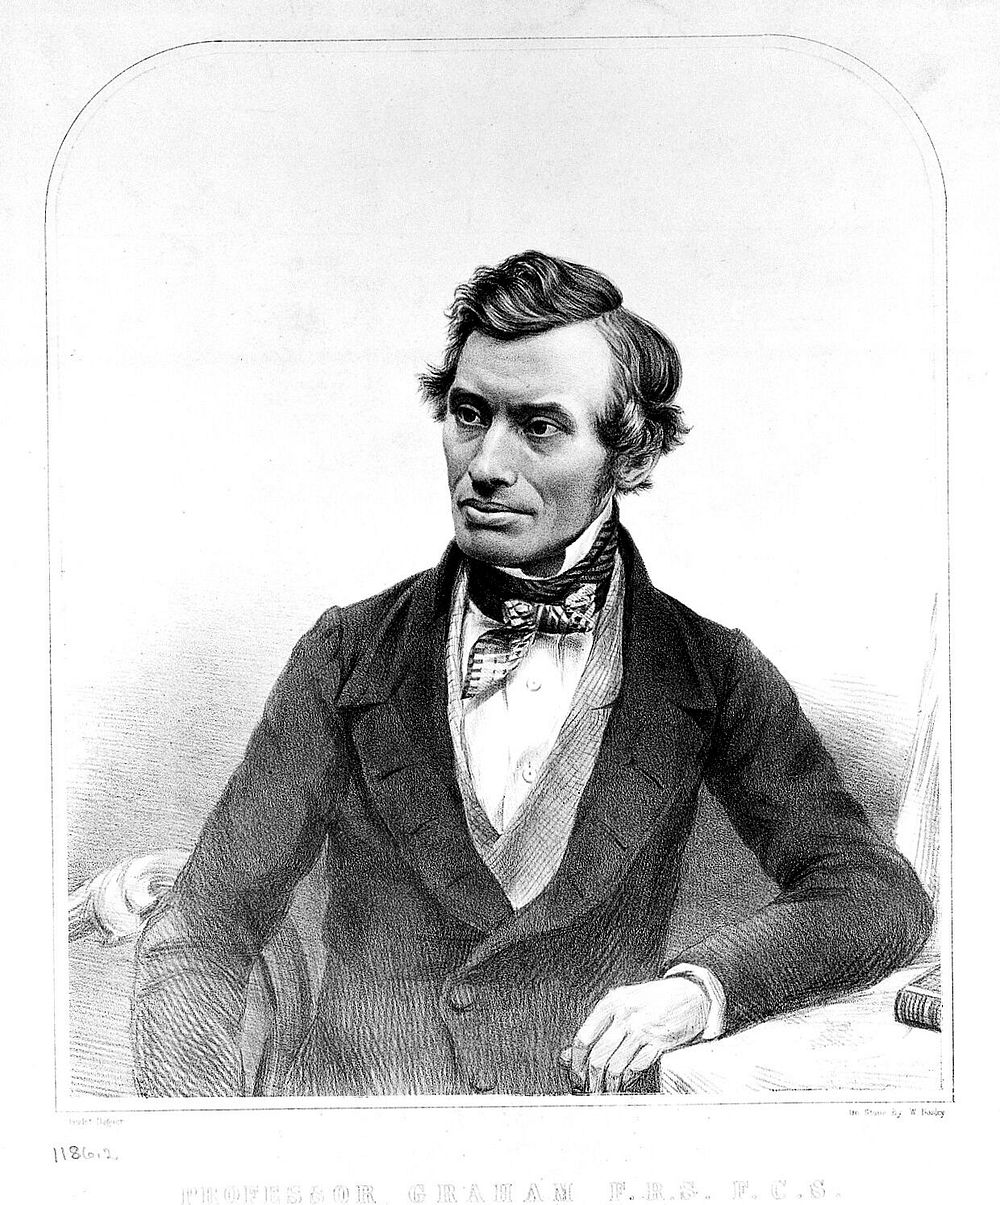 Thomas Graham. Lithograph by W. Bosley, 1849, after A. Claudet.